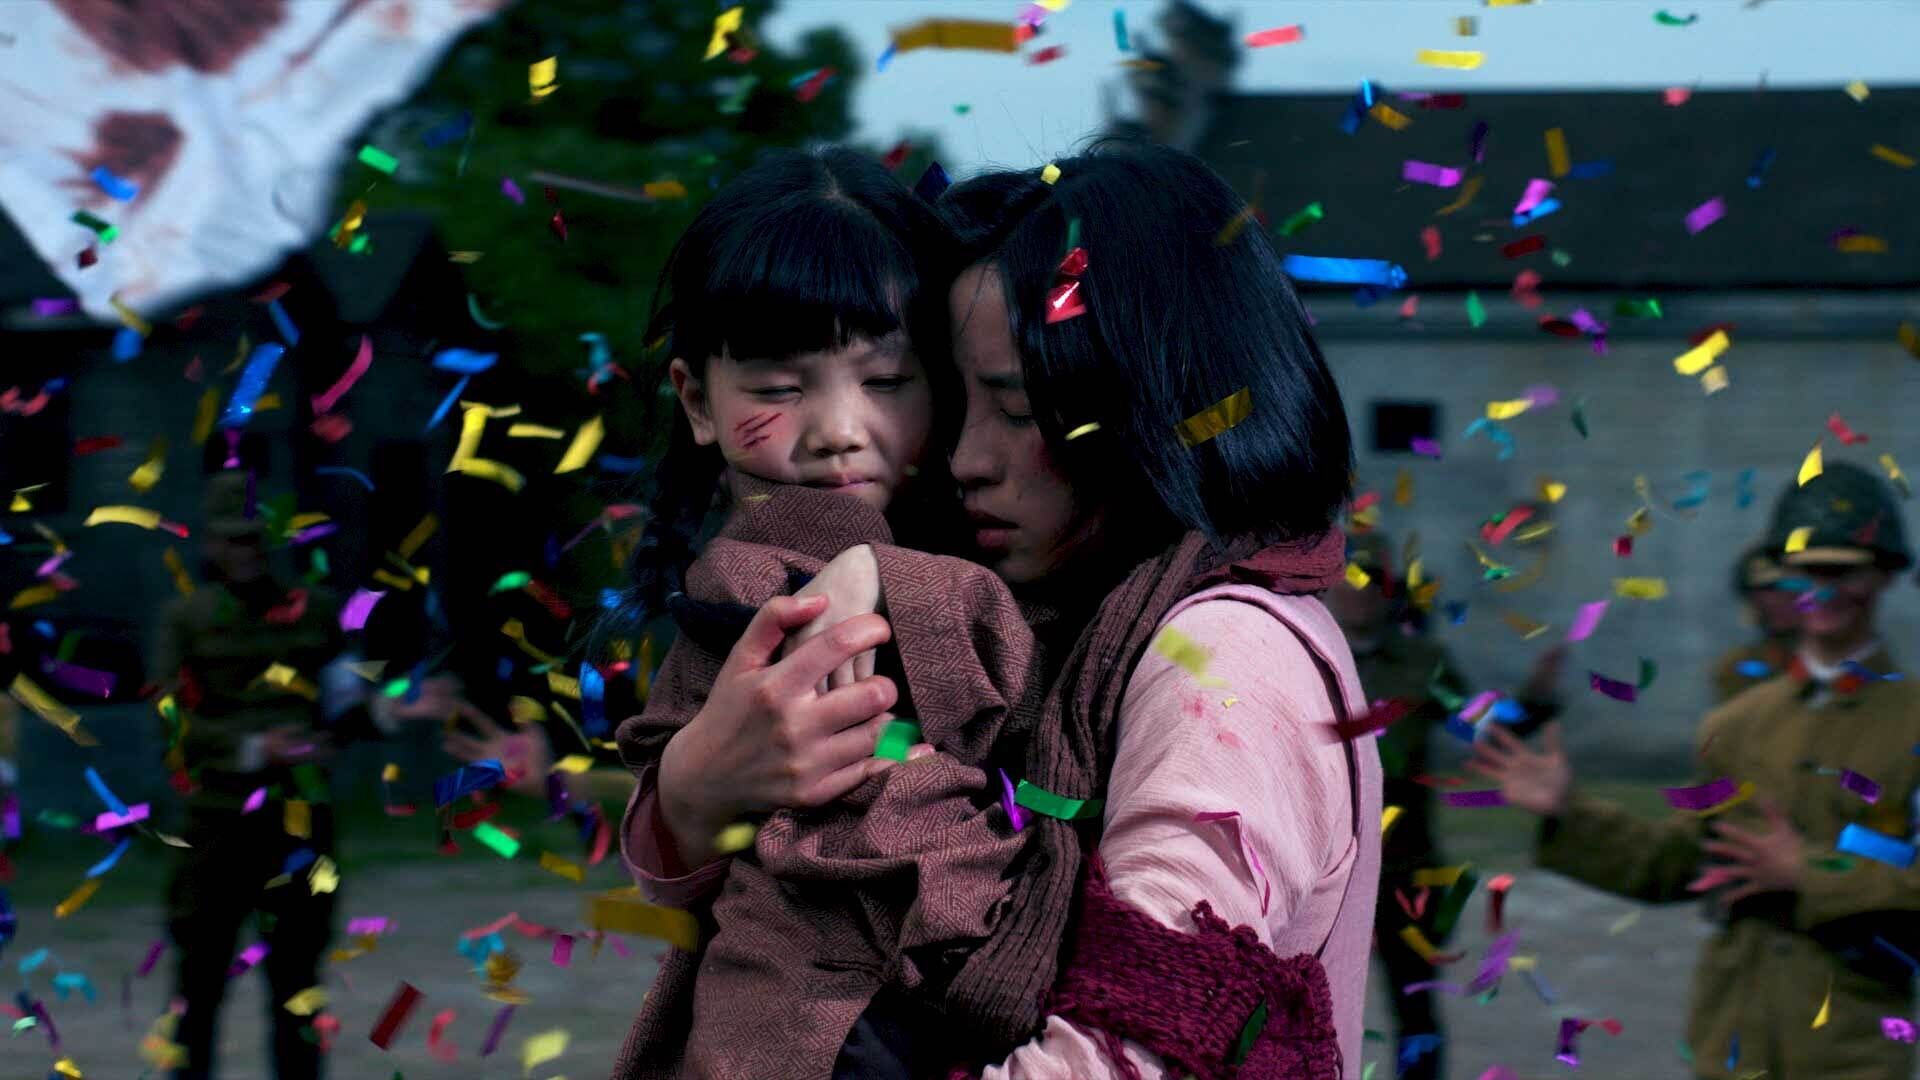 A woman and child embrace amid falling confetti, with one comforting the other who appears distressed with a bloody mark on their face.